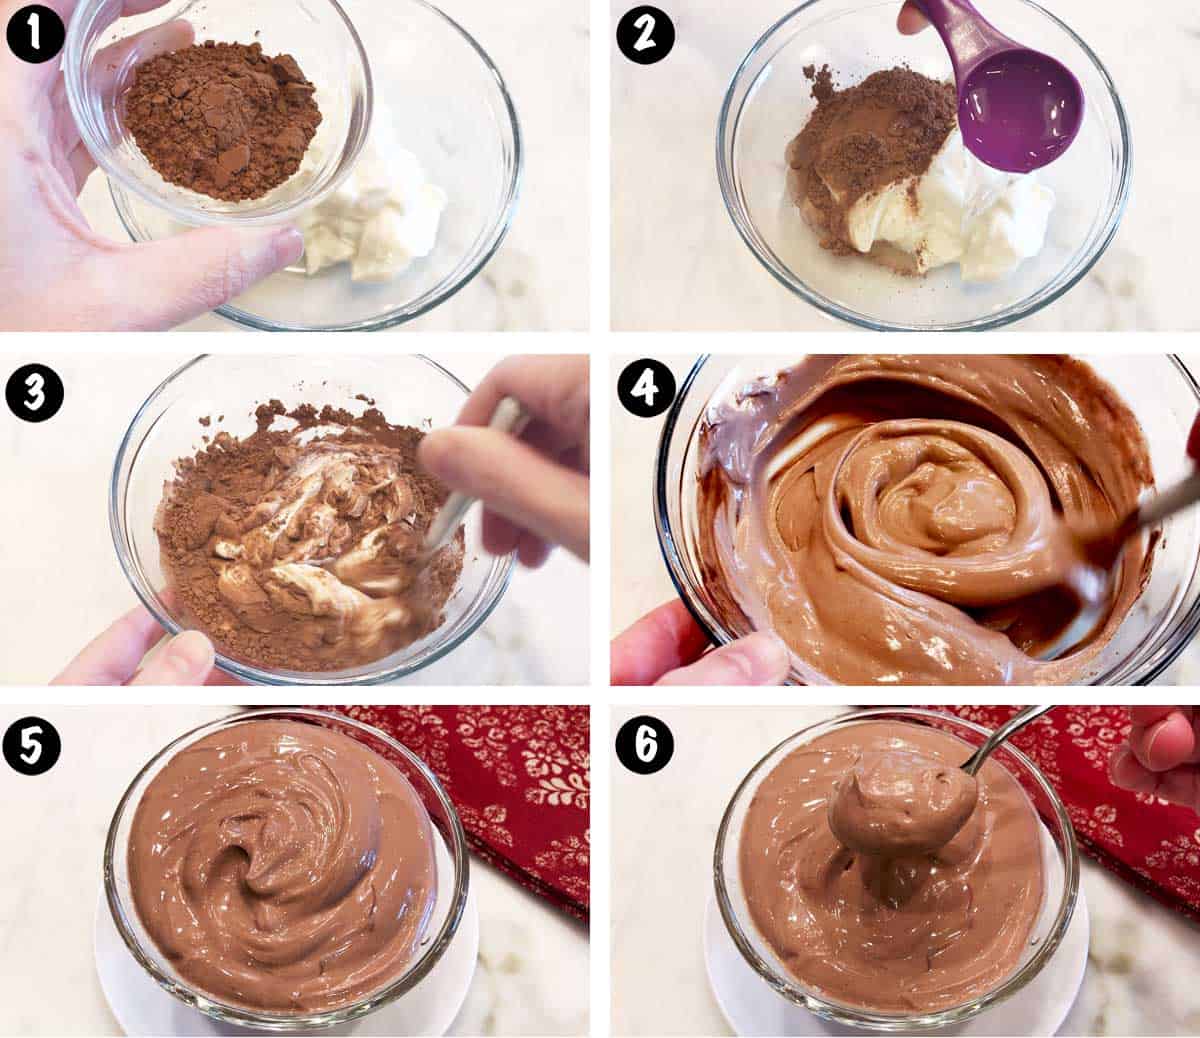 A photo collage showing the steps for making chocolate yogurt. 